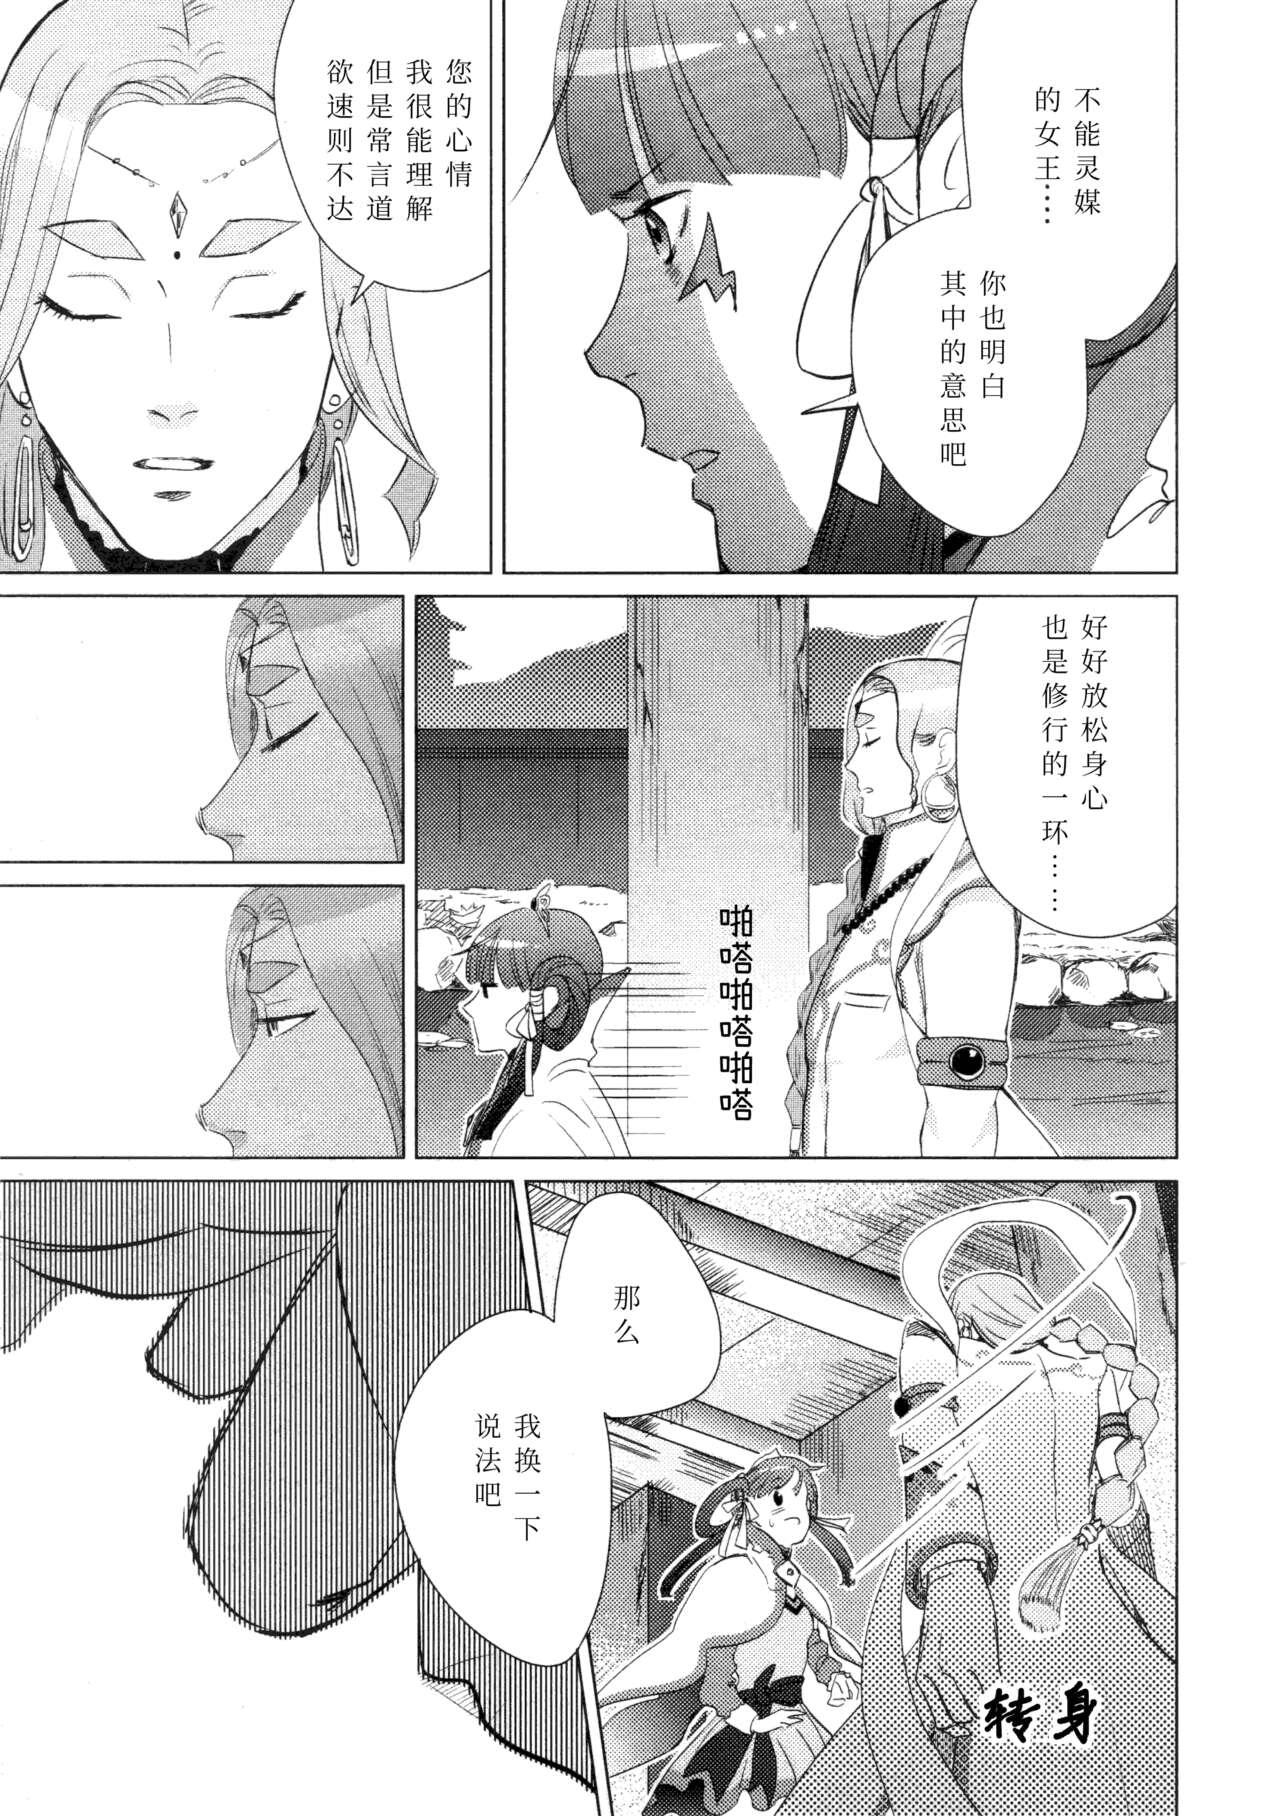 Licking Pussy Don't leave me alone,my big LITTLE brother - Ace attorney | gyakuten saiban Old - Page 12